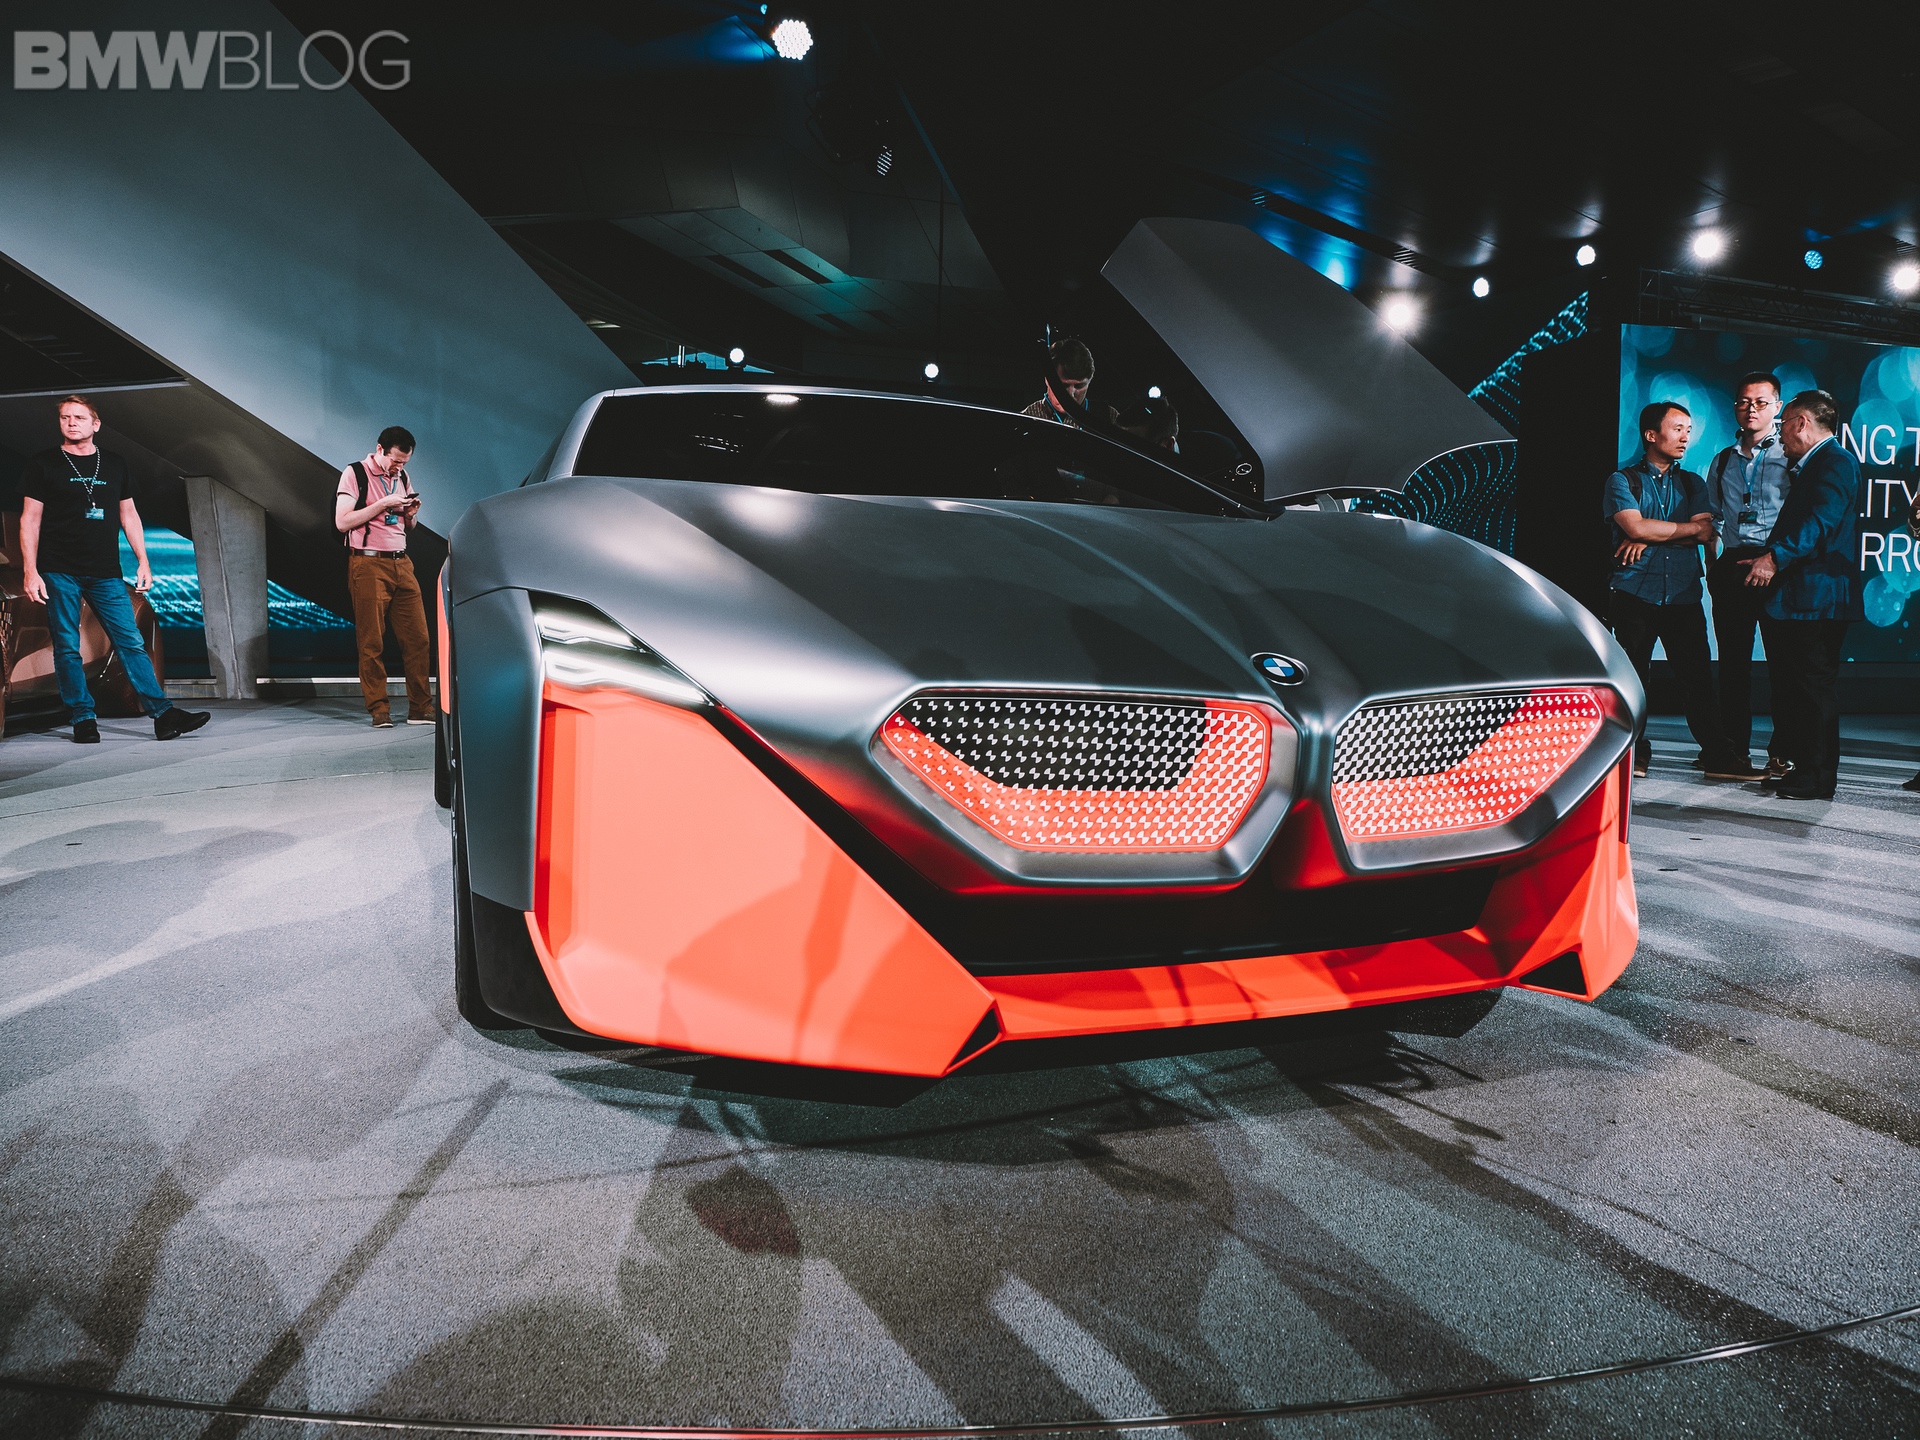 BMW M Vision Next to arrive in 2023 as an i8 replacement